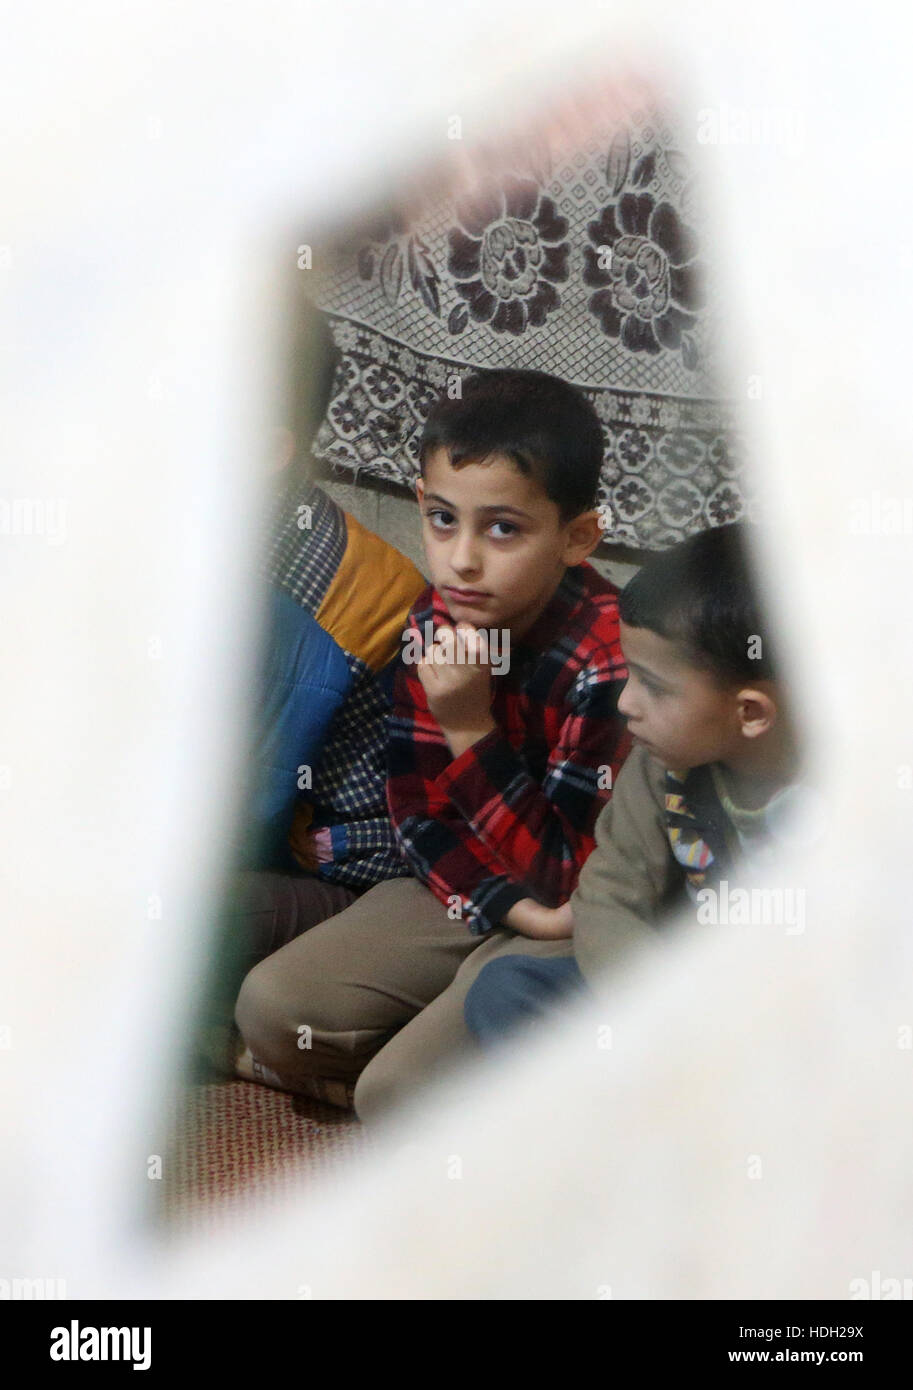 Syrian refugee Omar Al Rahal, 9, is reflected in a broken mirror as he sits alongside his brothers in an apartment in Tripoli, Lebanon, after the family fled their home in Homs, Syria. Stock Photo